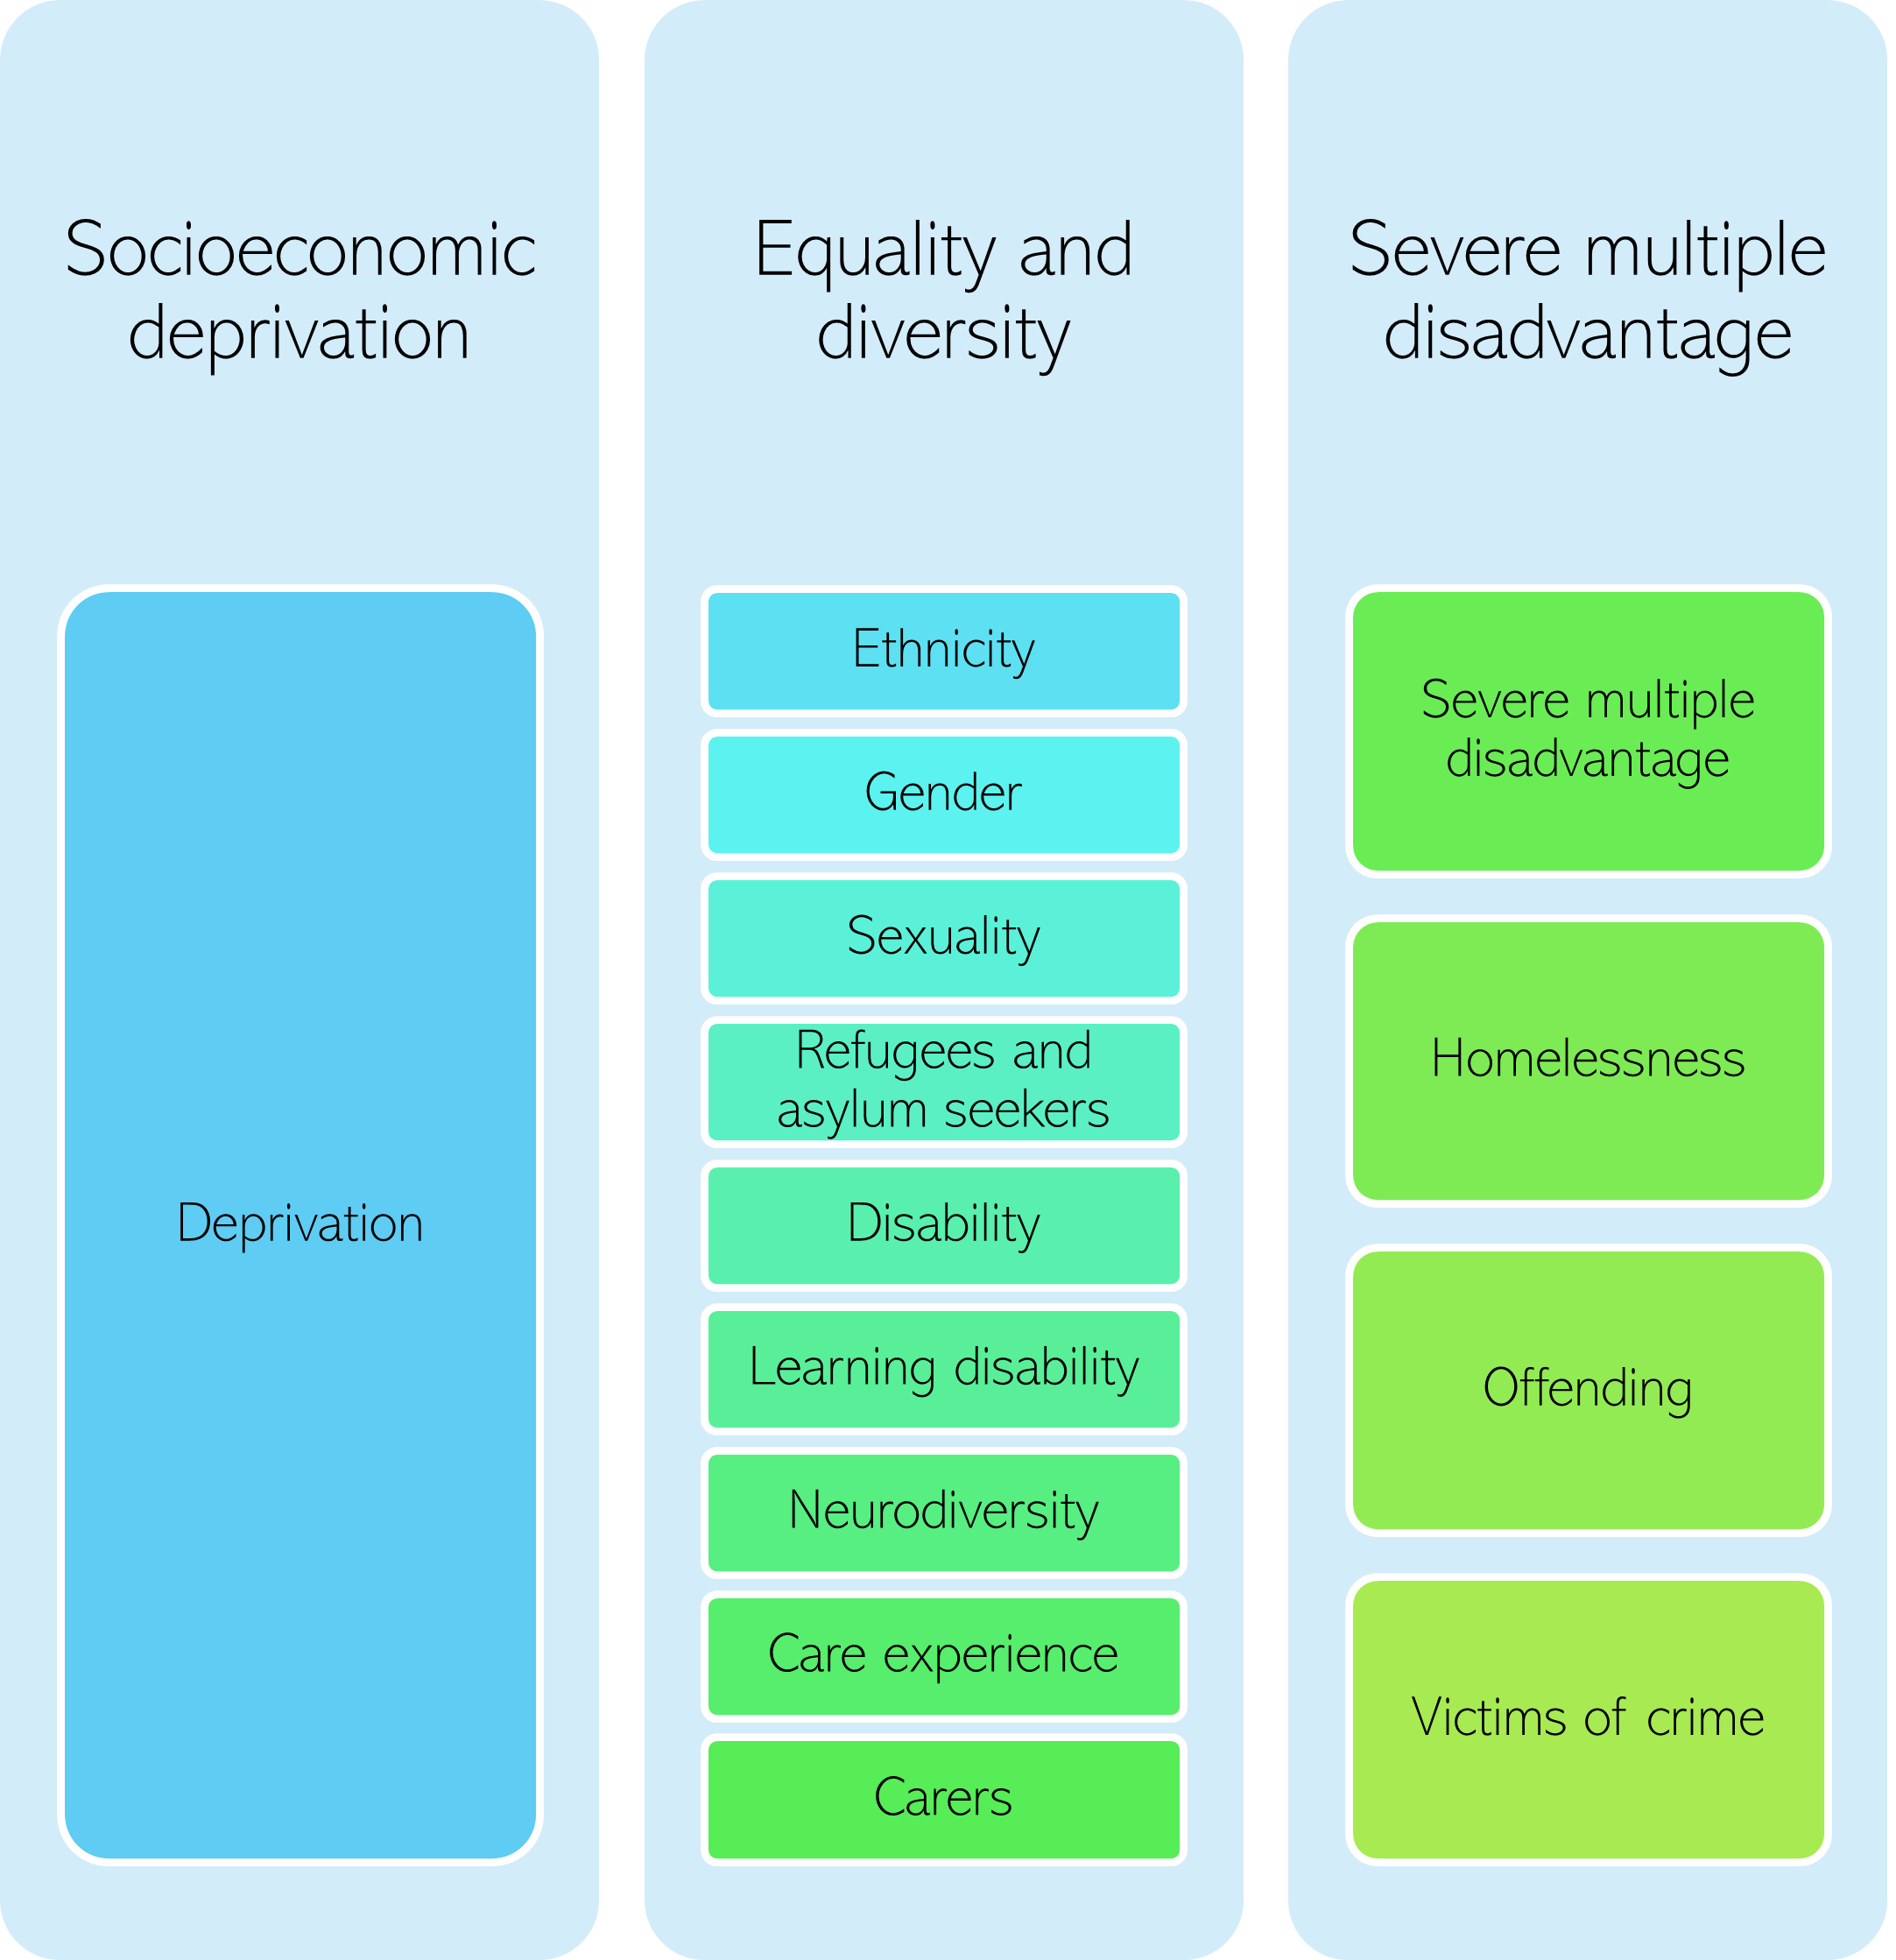 Image showing structure of inequalities groups